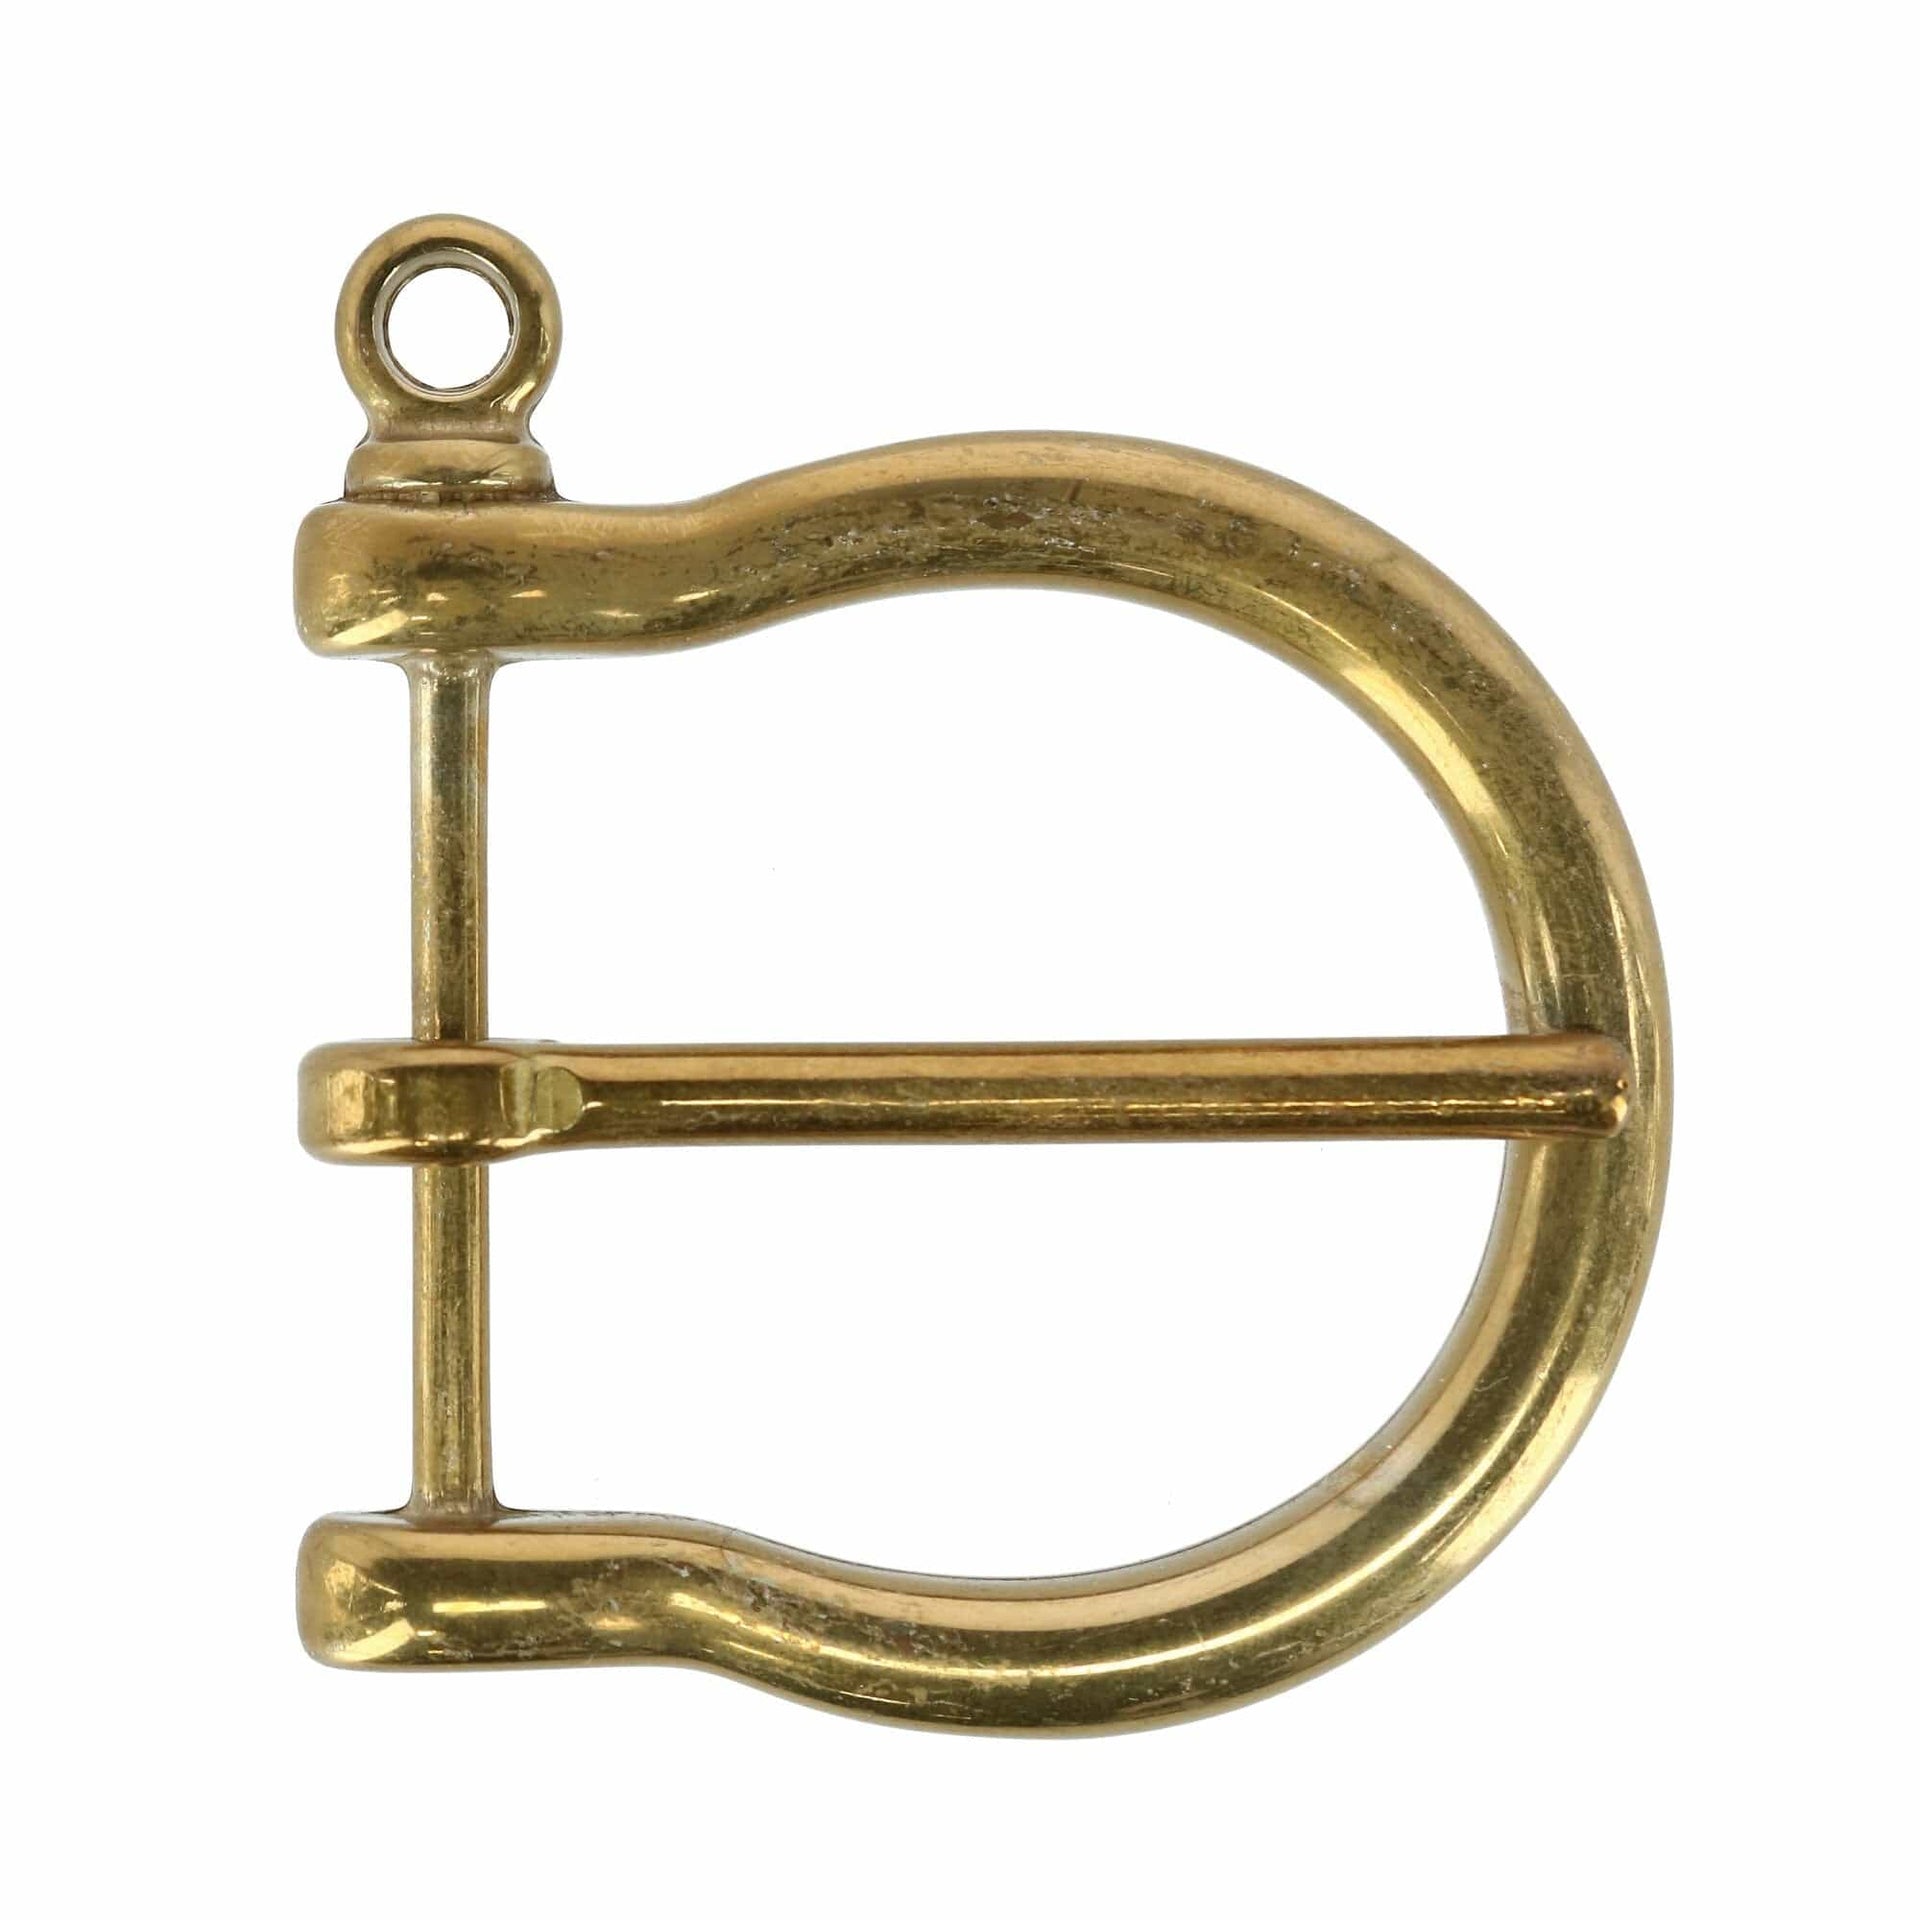 35mm Distinguished Rounded Solid Brass Harness Belt Buckle by Trafalgar  Men's Accessories